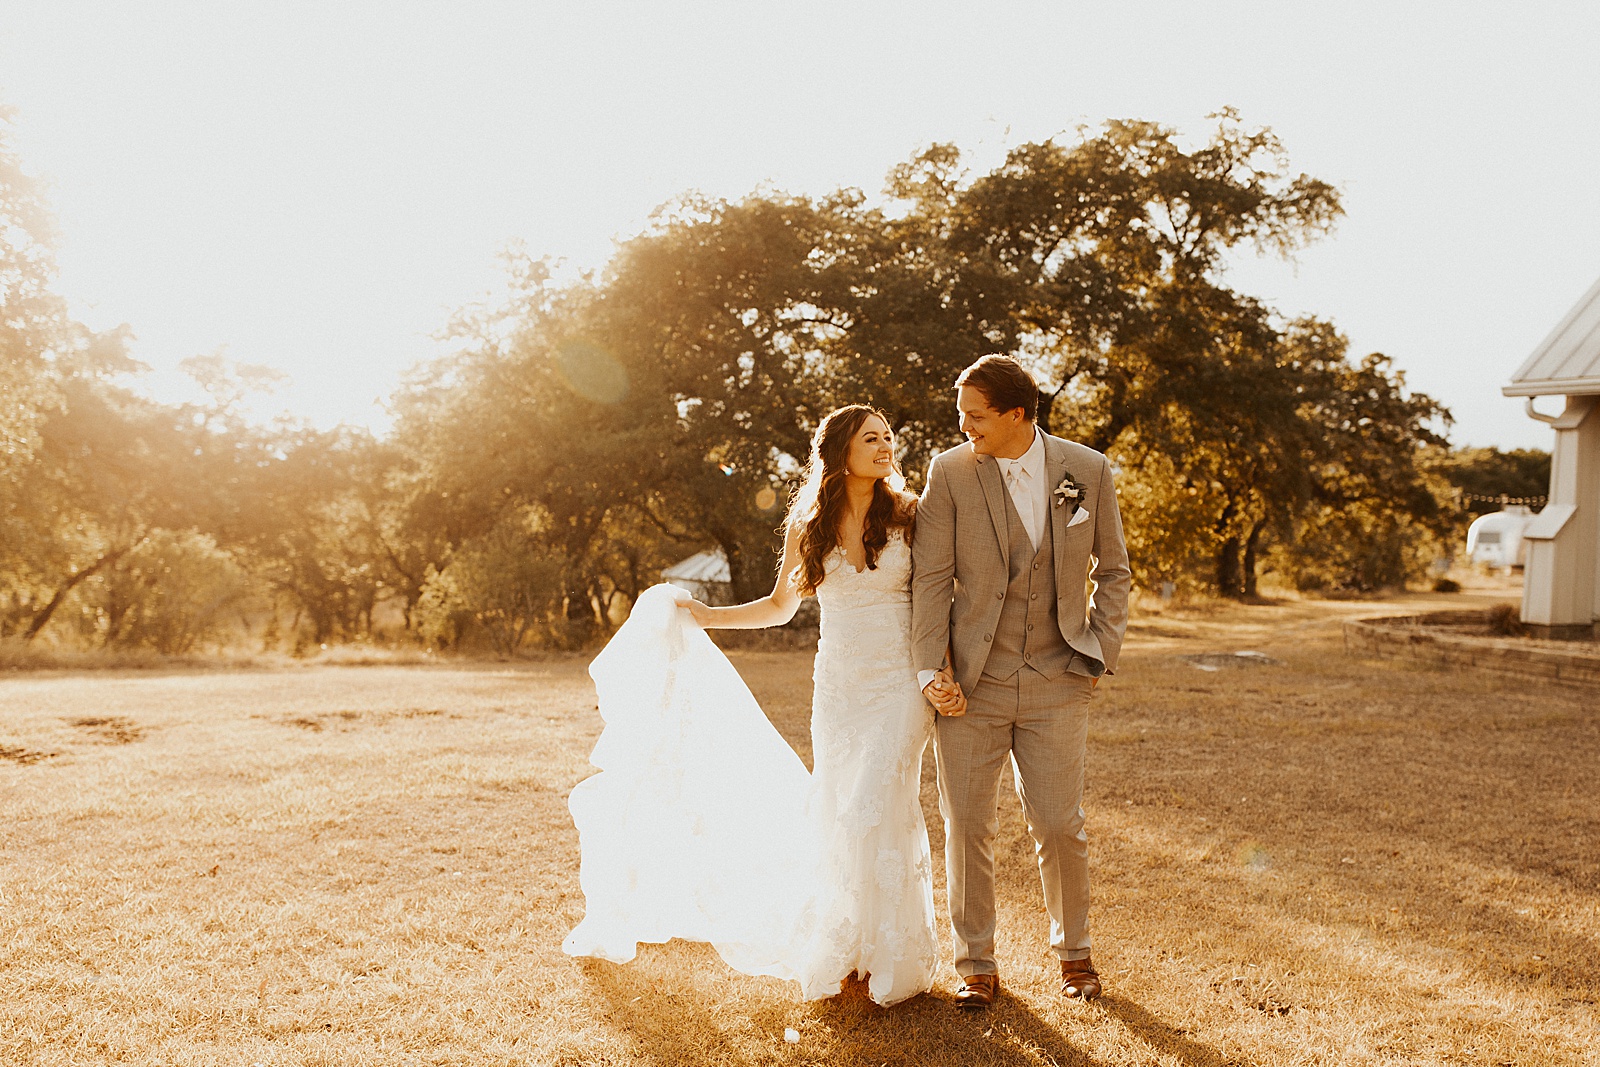 A bride and groom photo at their wedding at the Heritage Haus Wedding Venue in Dripping Springs, TX.